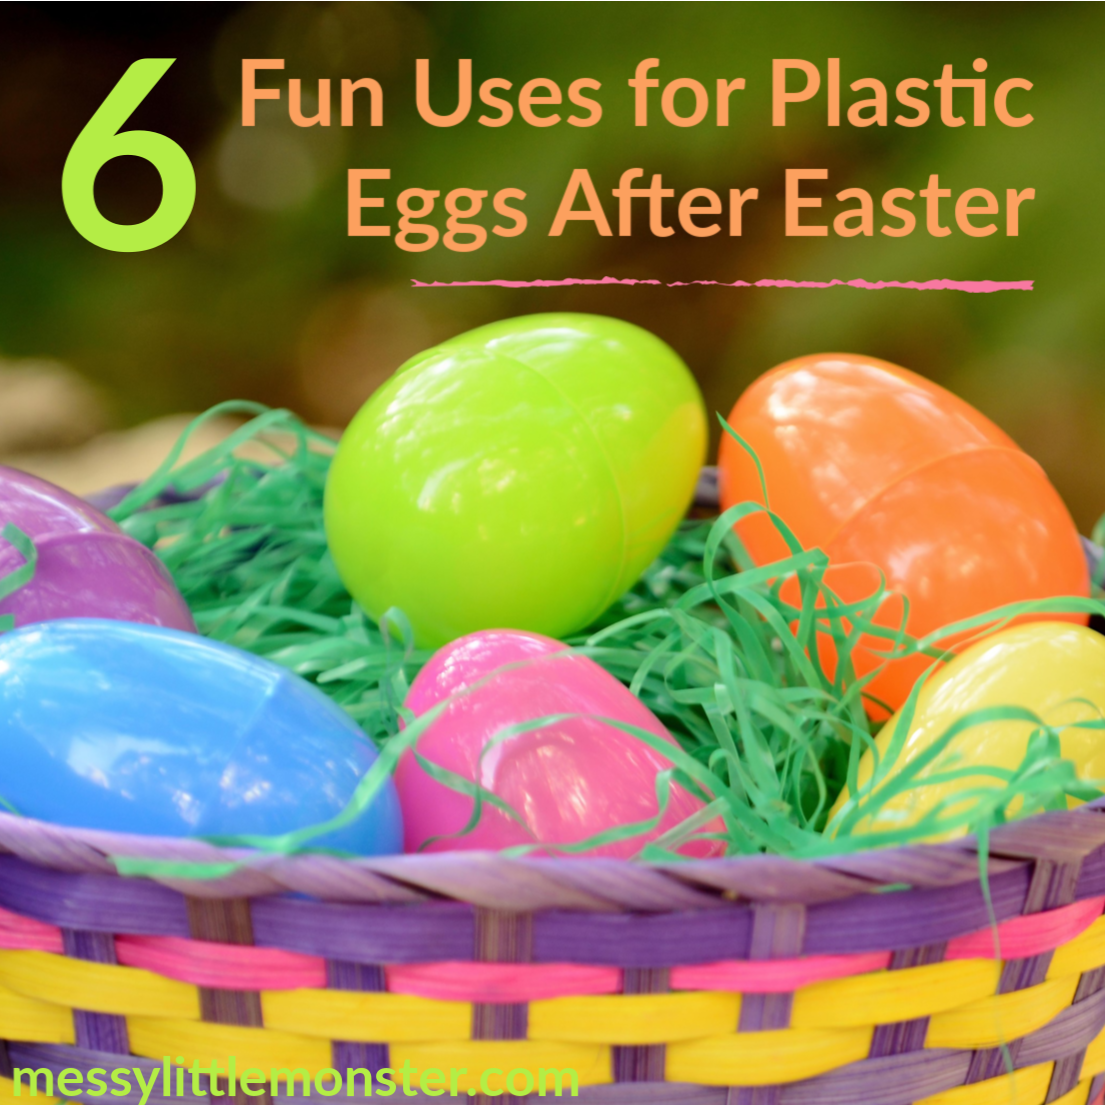 6 Fun Uses for Plastic Eggs After Easter. Plastic egg activities for kids.